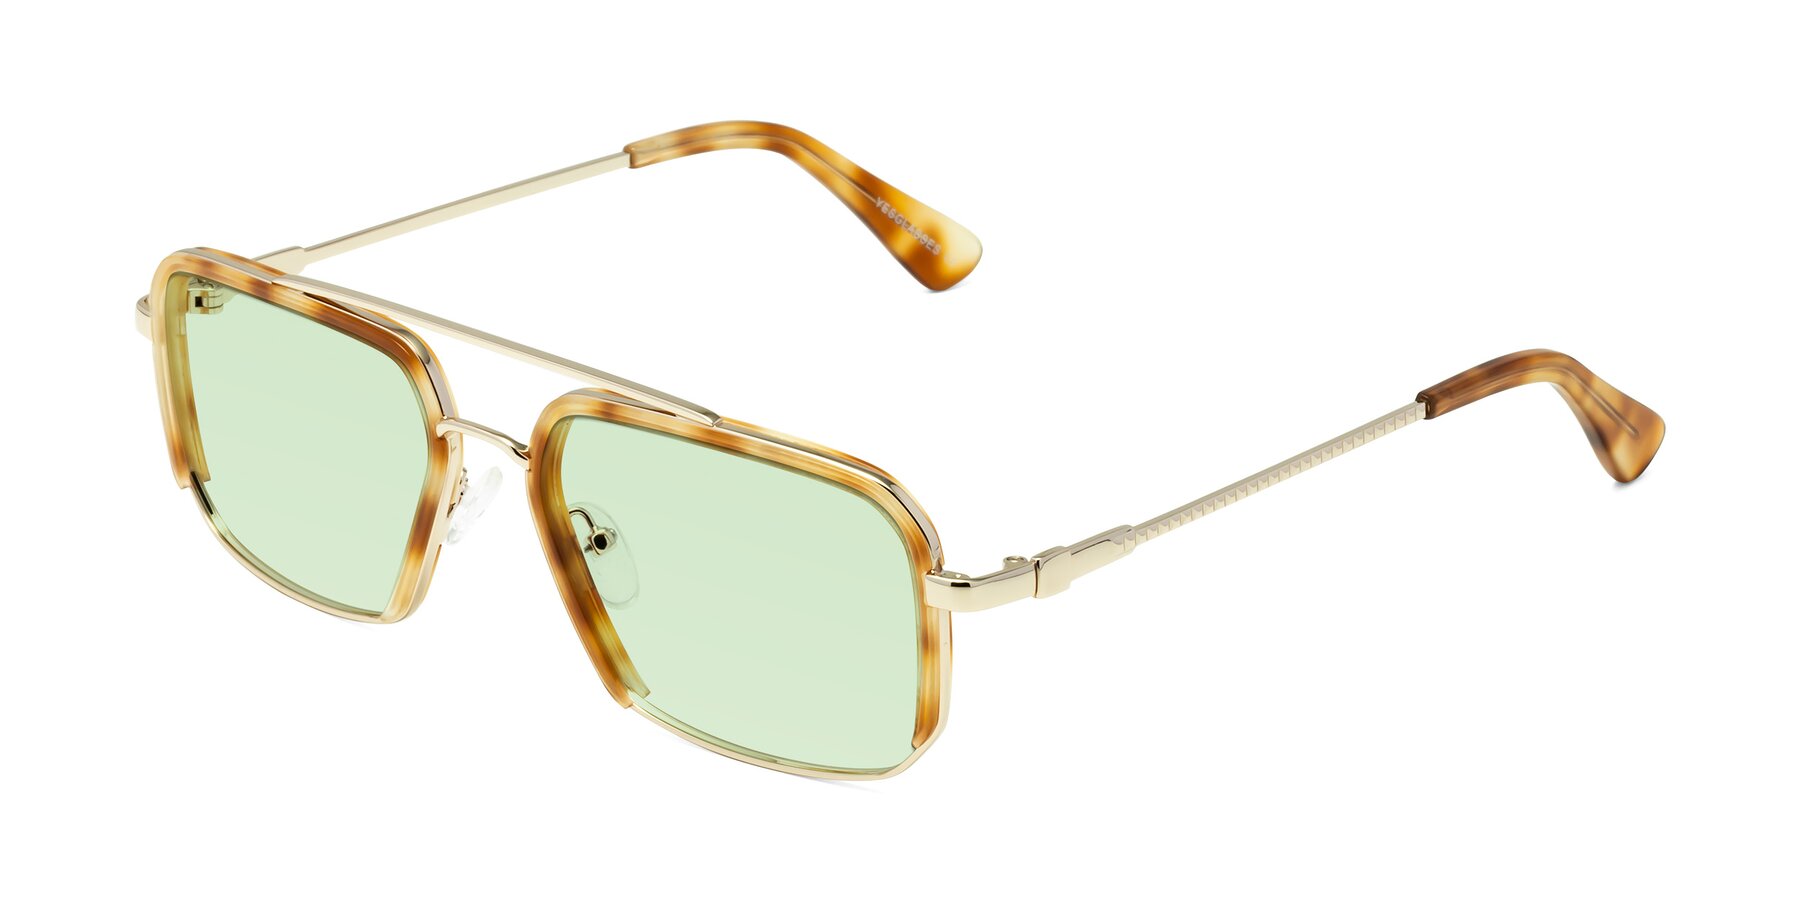 Angle of Dechter in Yellow Tortoise-Gold with Light Green Tinted Lenses